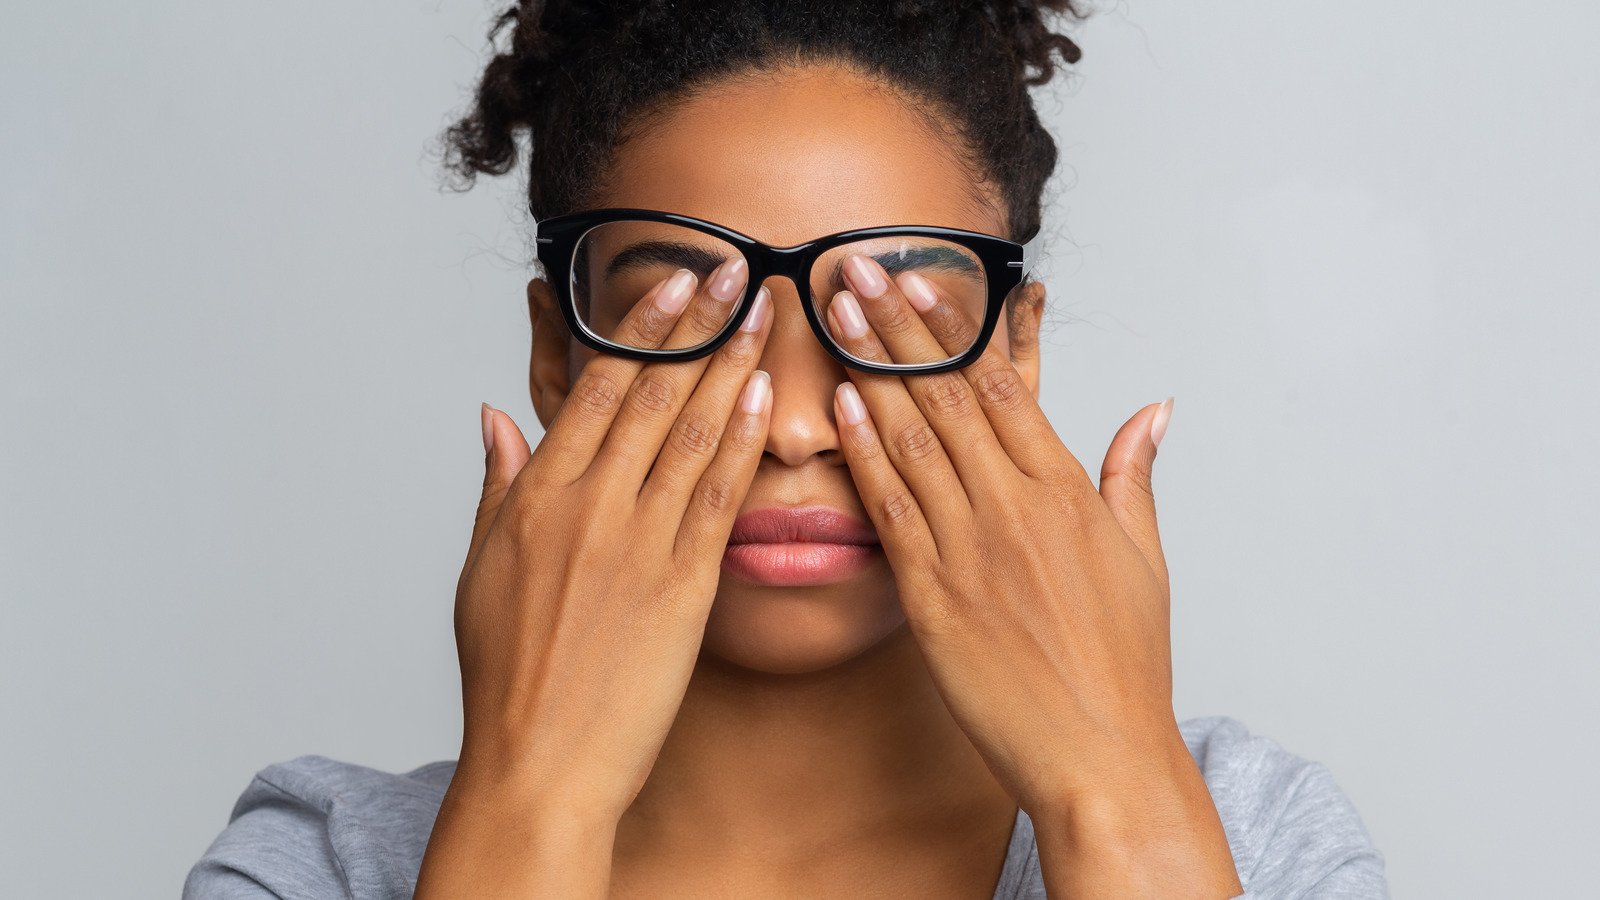 The Real Reason Why Rubbing Your Eyelids Feels So Good